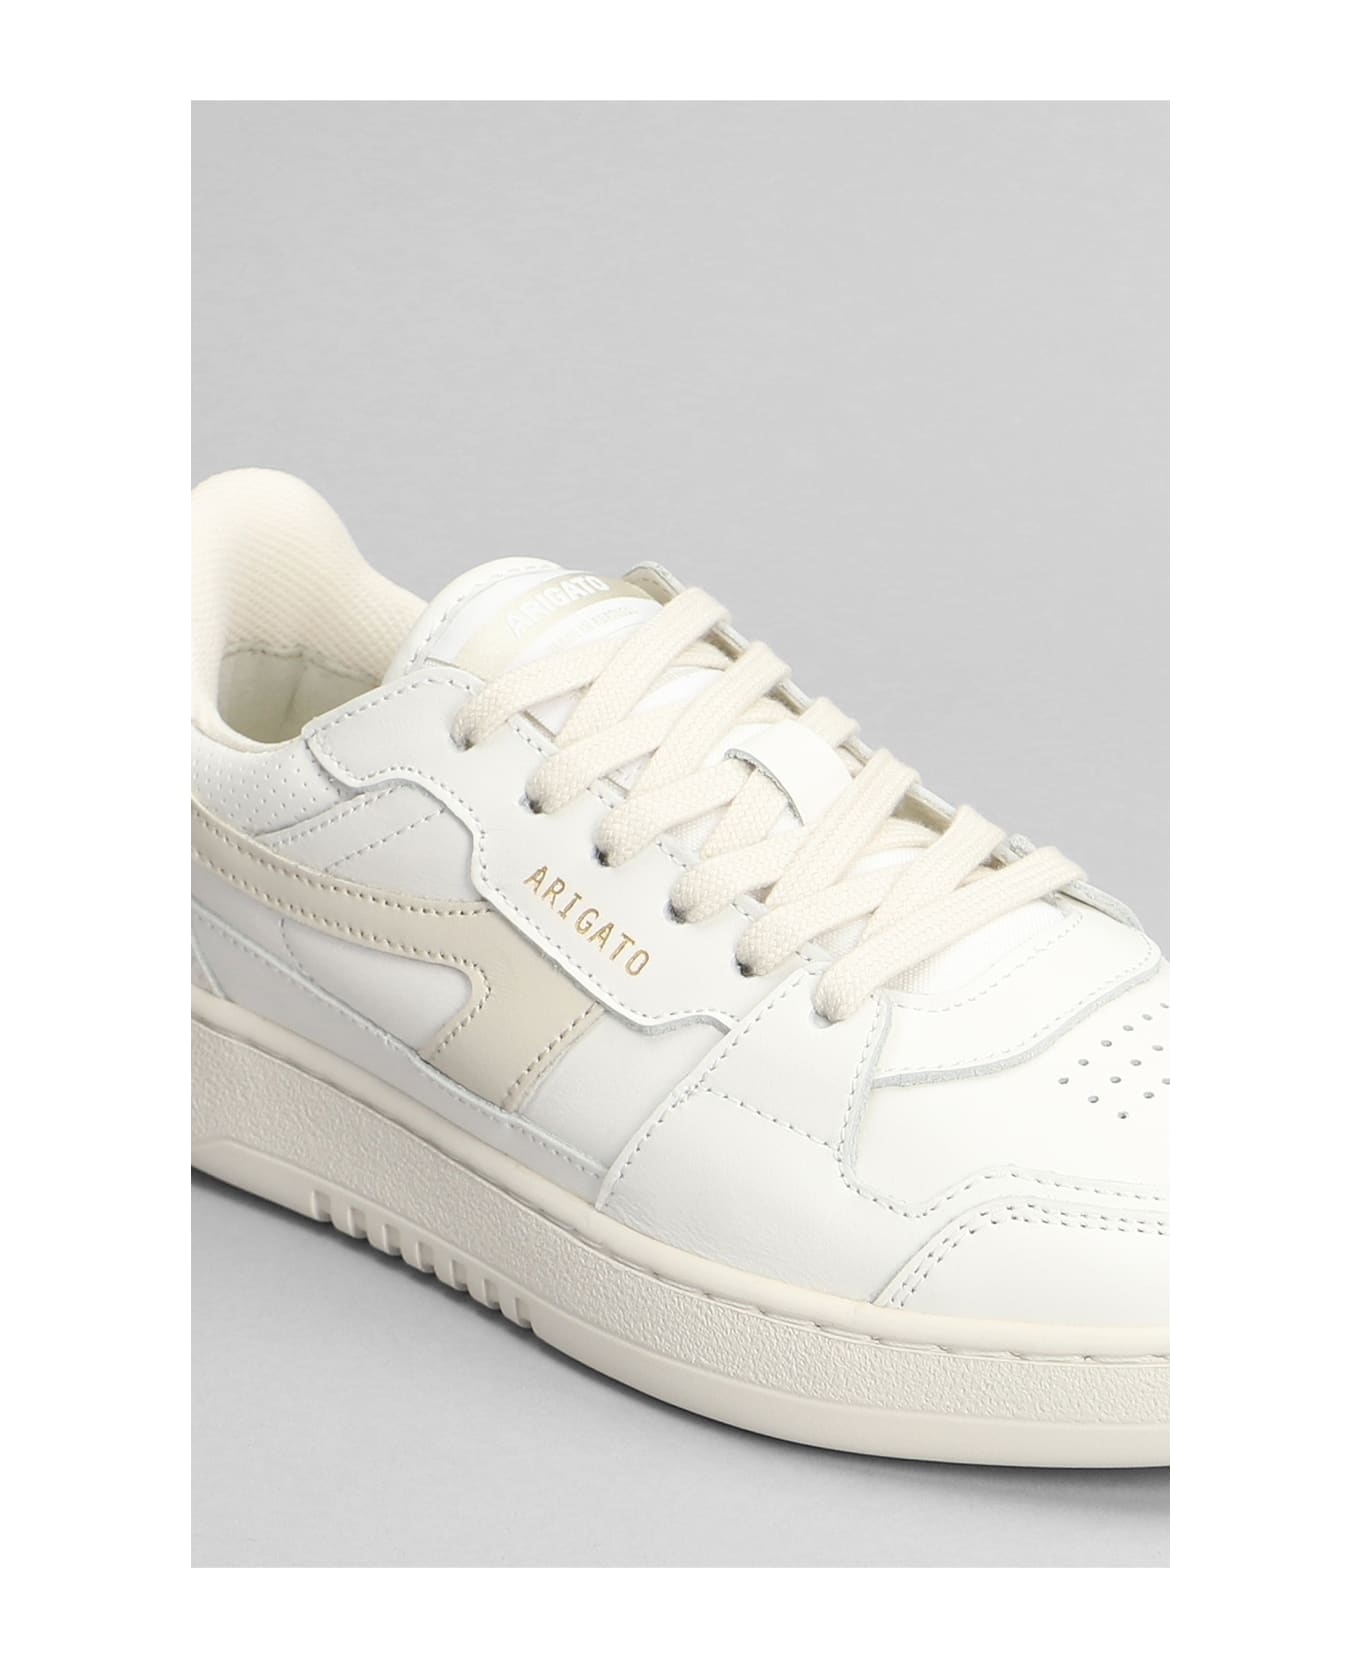 Axel Arigato Dice-a Sneaker Sneakers In White Leather - white